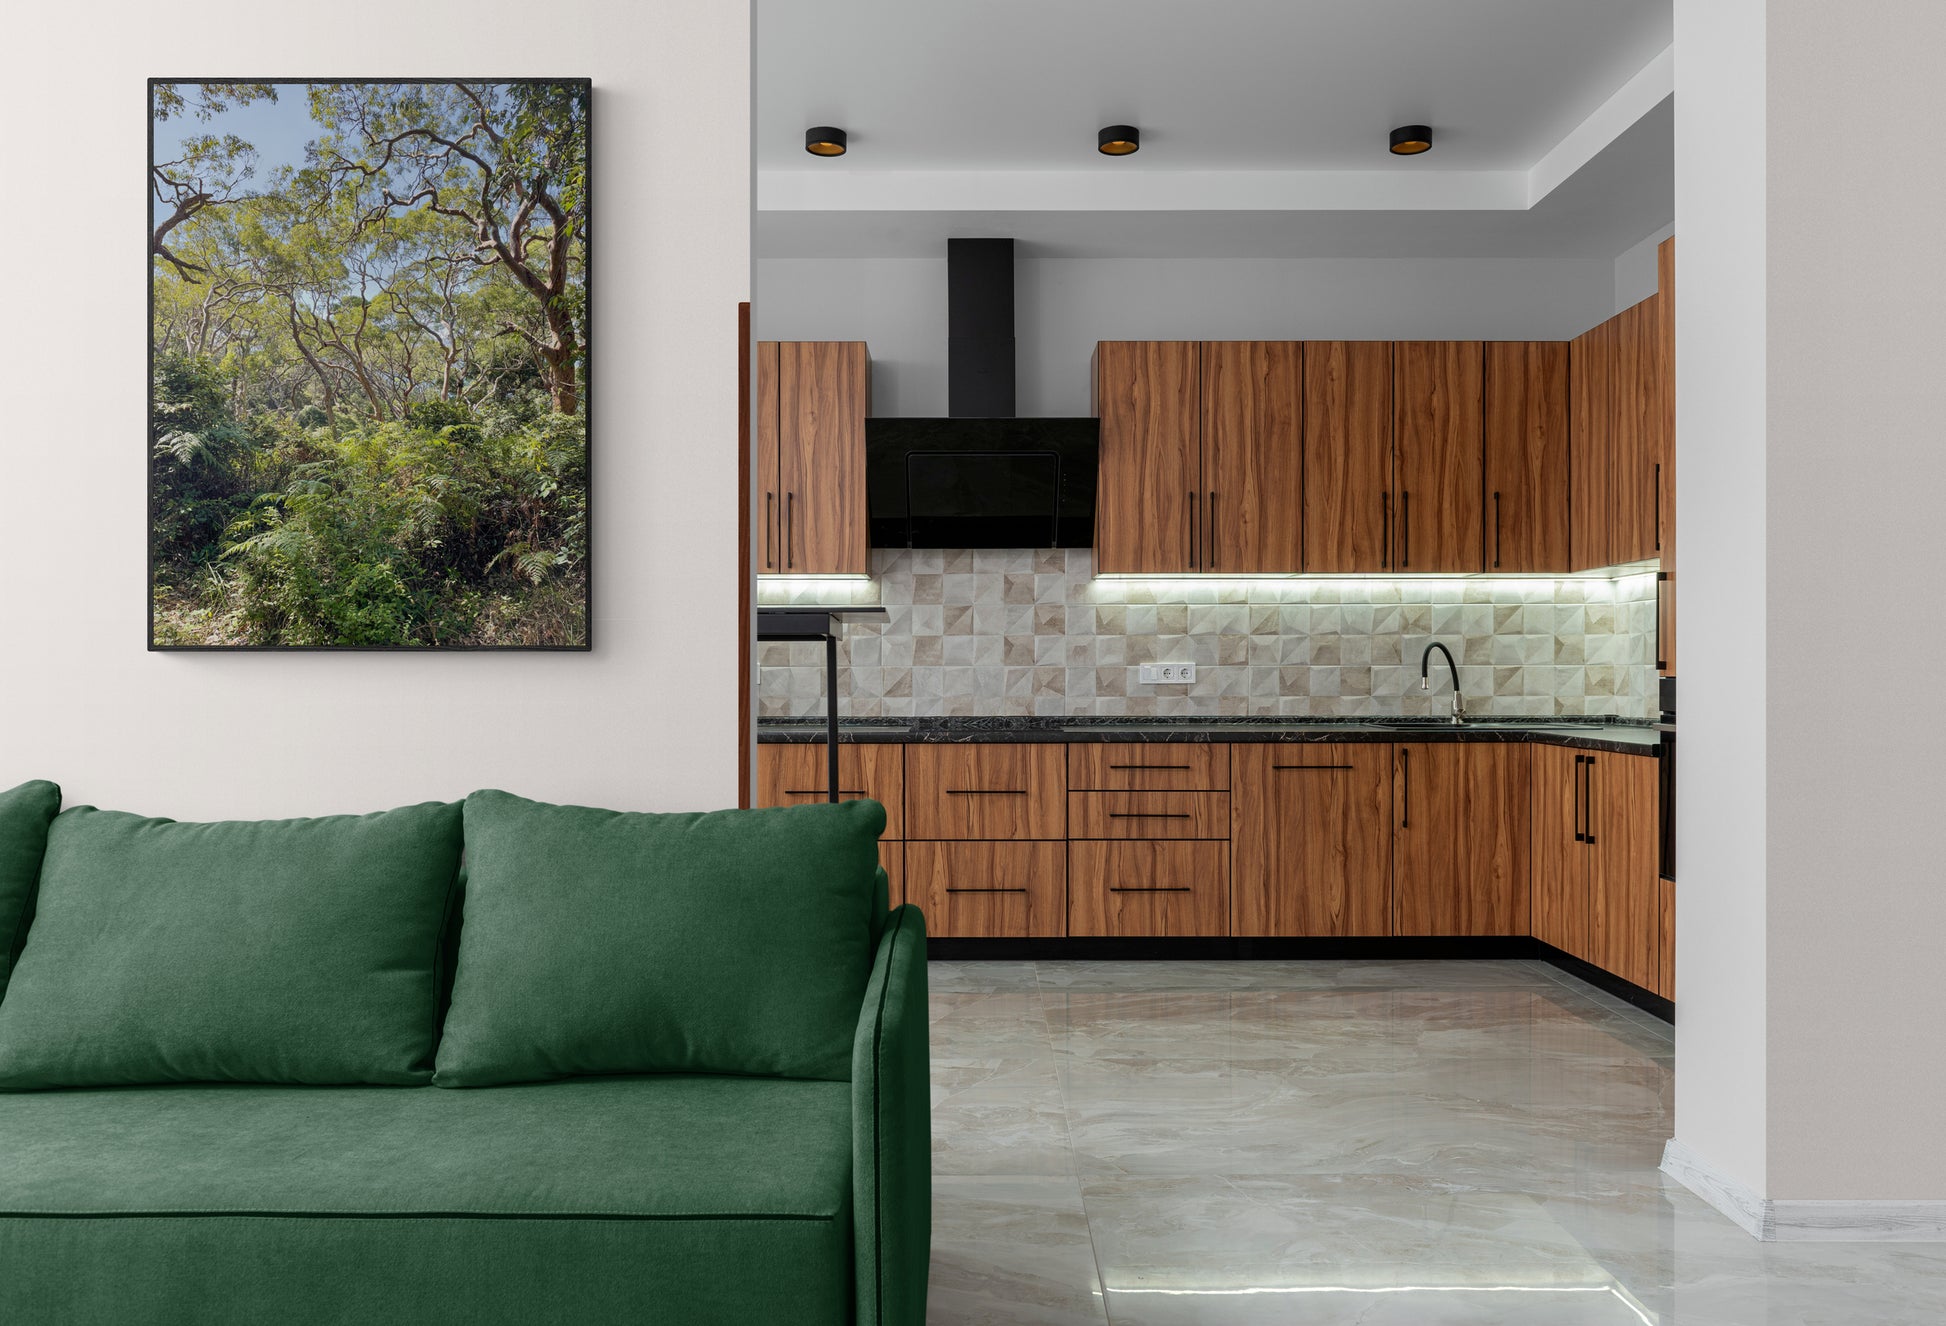 Rainforest Canvas Wall Art in lounge room with white walls, kitchen, green lounge, polished tiled floor and brown kitchen cupboards